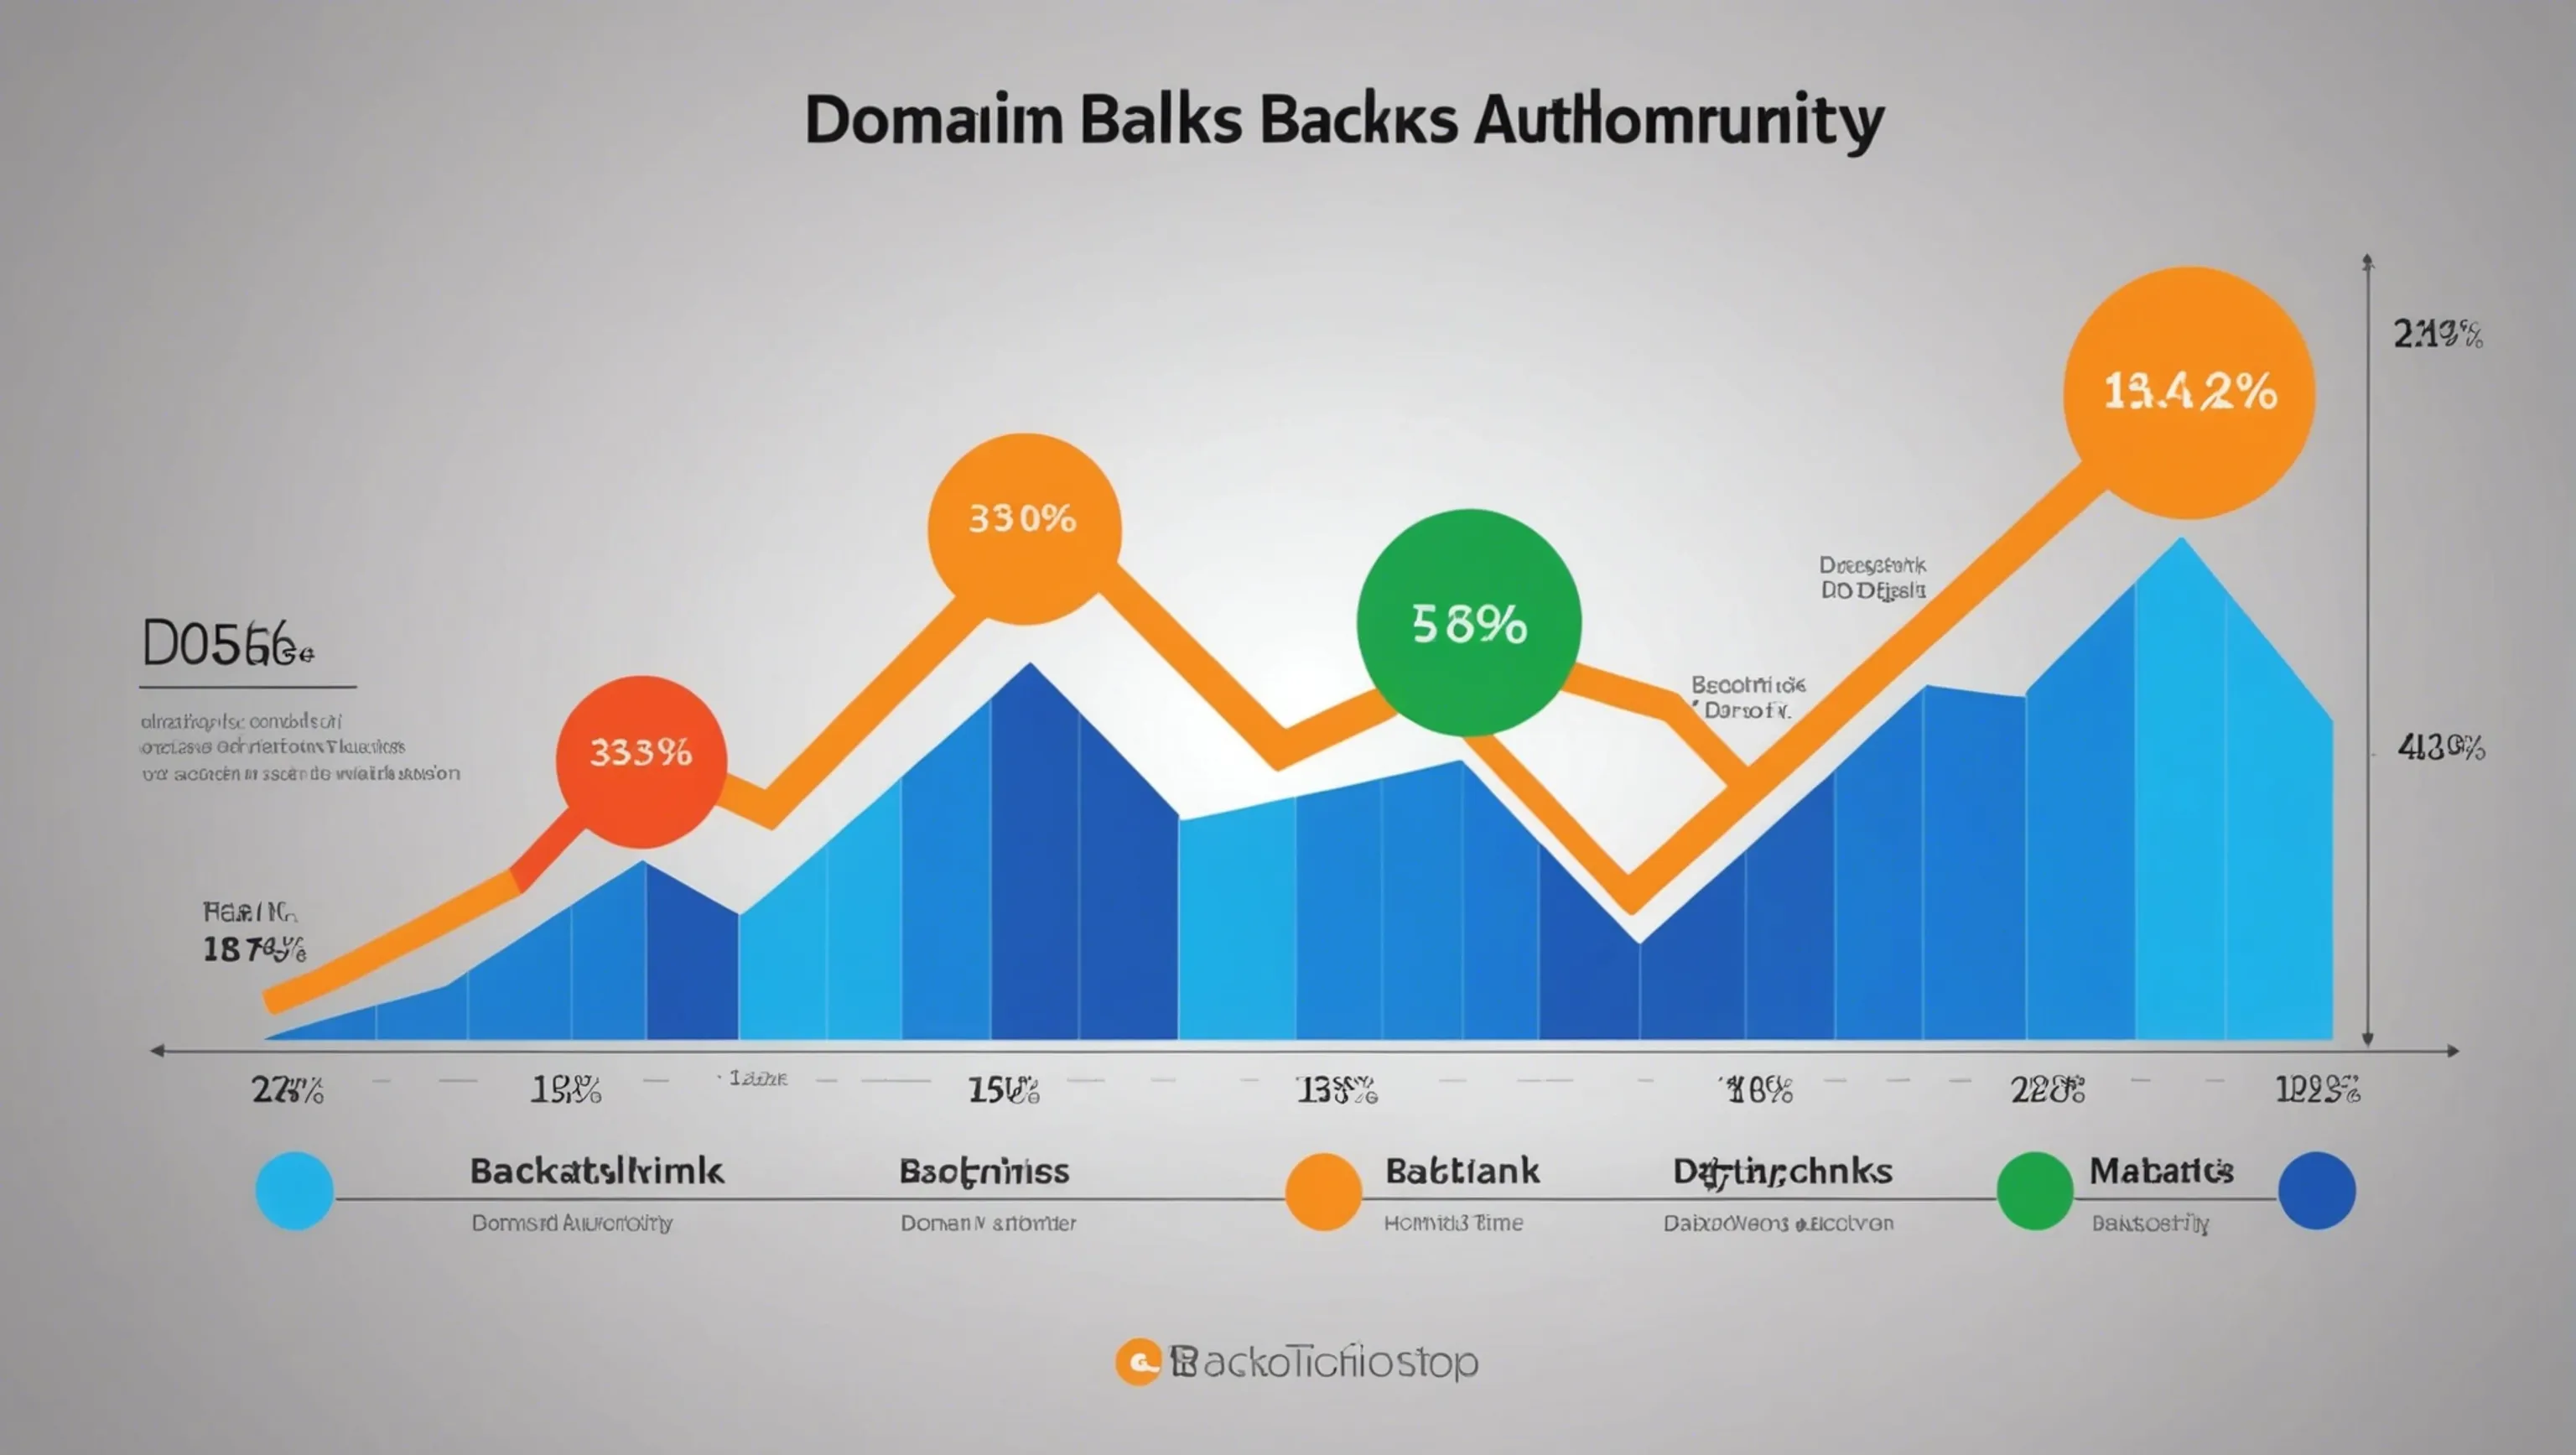 Monitoring Backlinks and Domain Authority